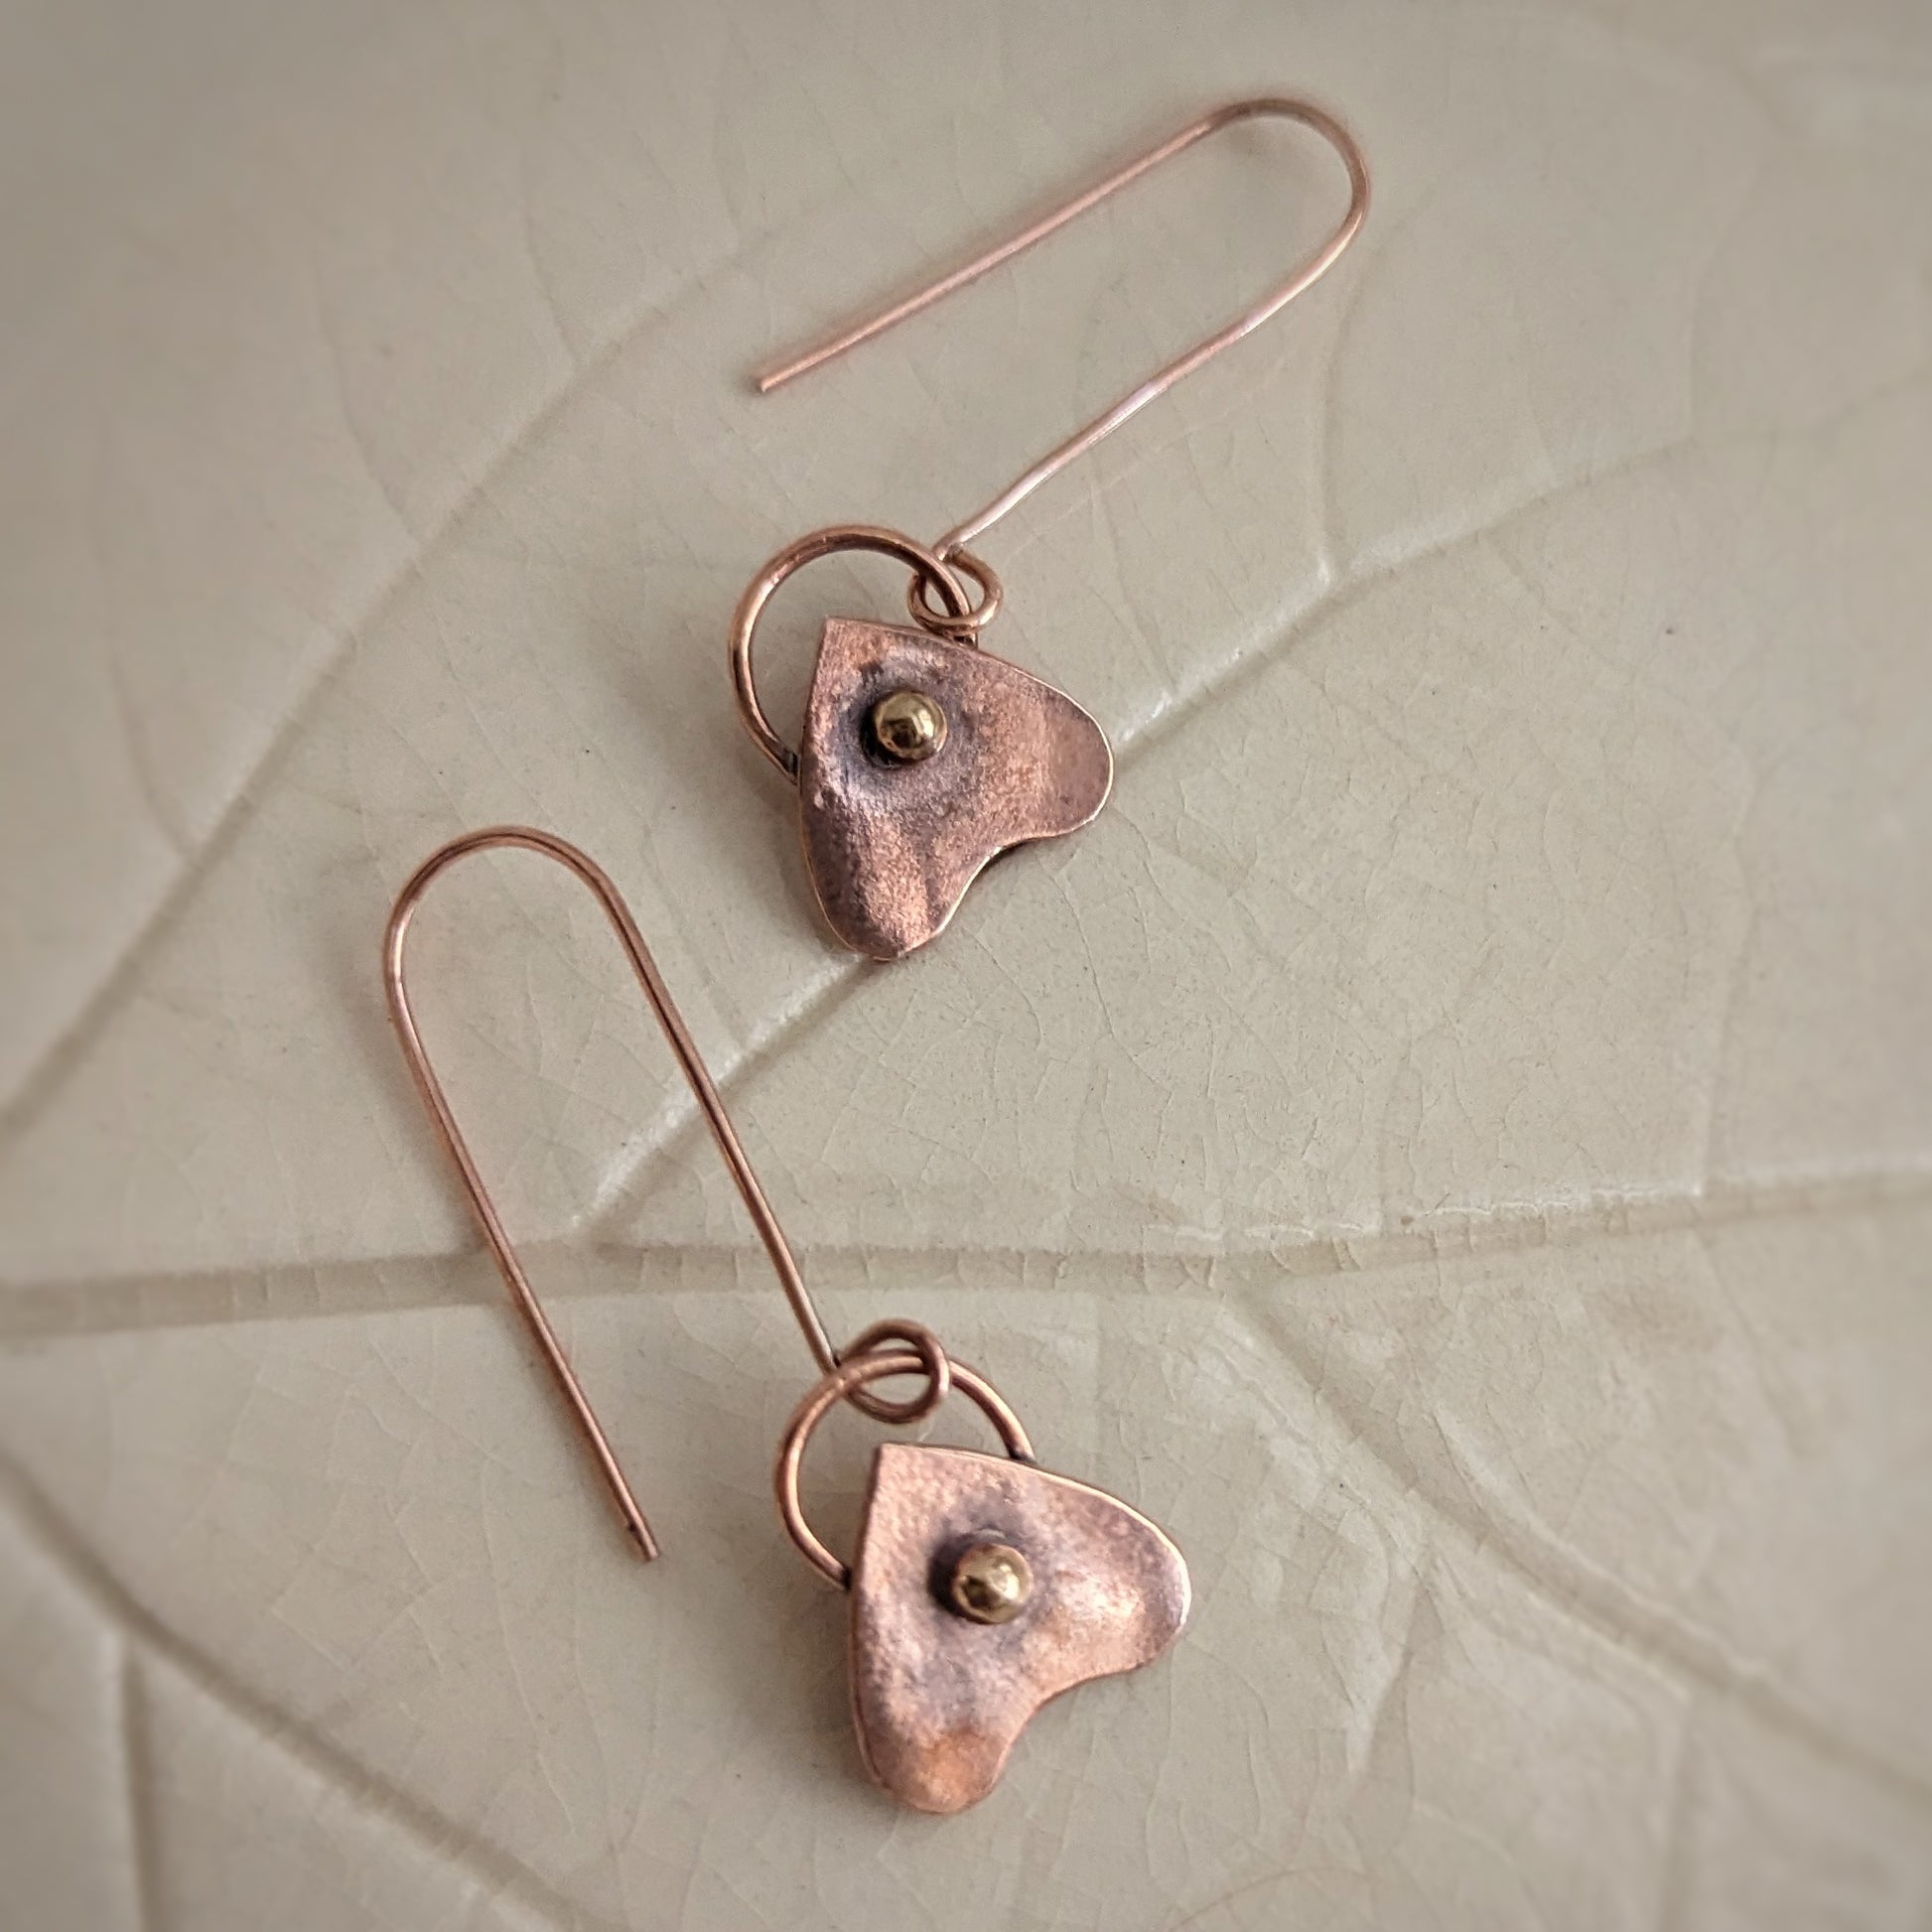 Tiny copper planchettes have a gold brass round pip in the viewing area and a swirling bail back on long copper hooks.